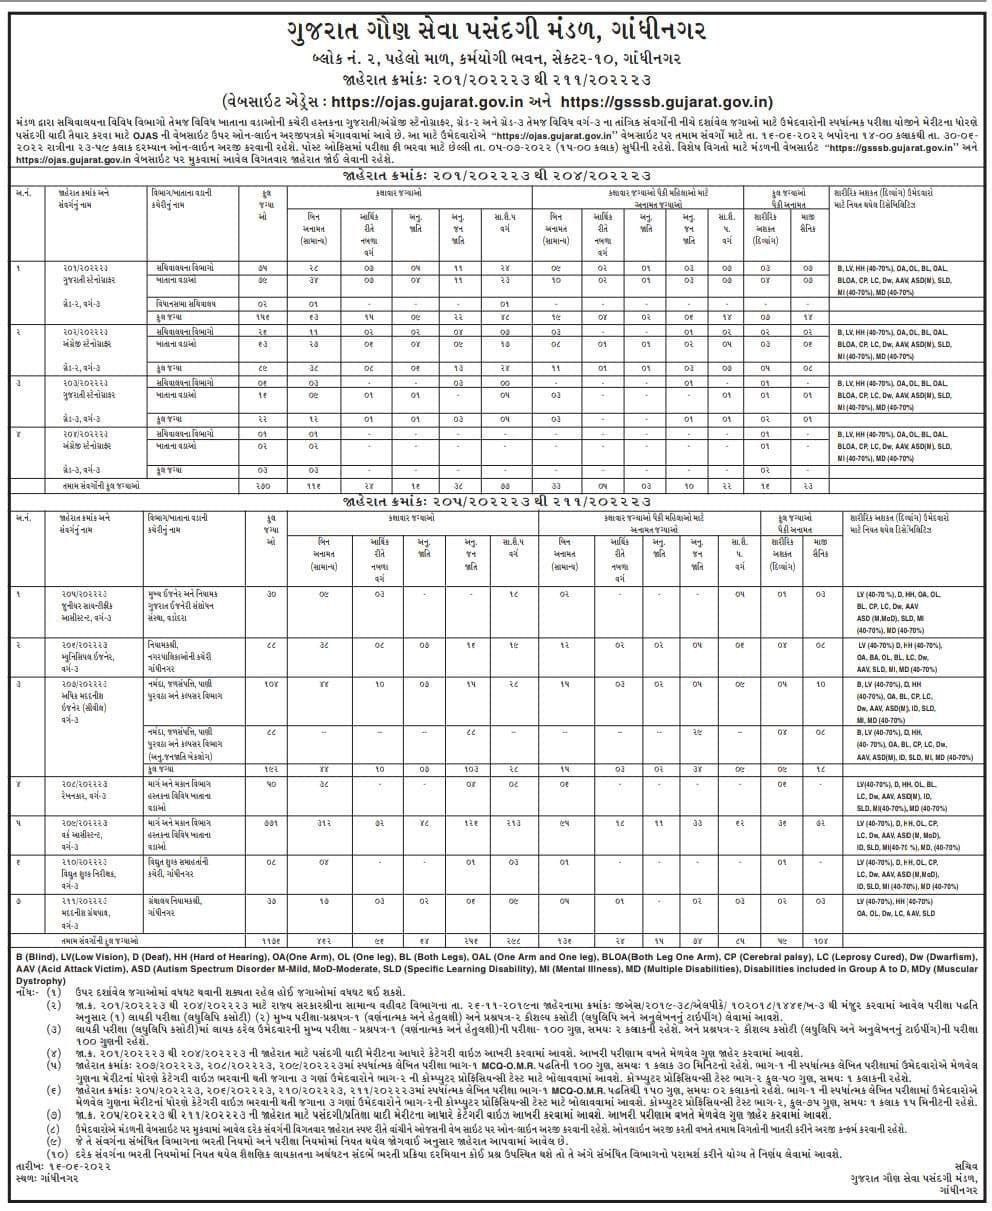 (GSSSB) Recruitment for 1446 vacancies by Secondary Service Selection Board. Apply online.